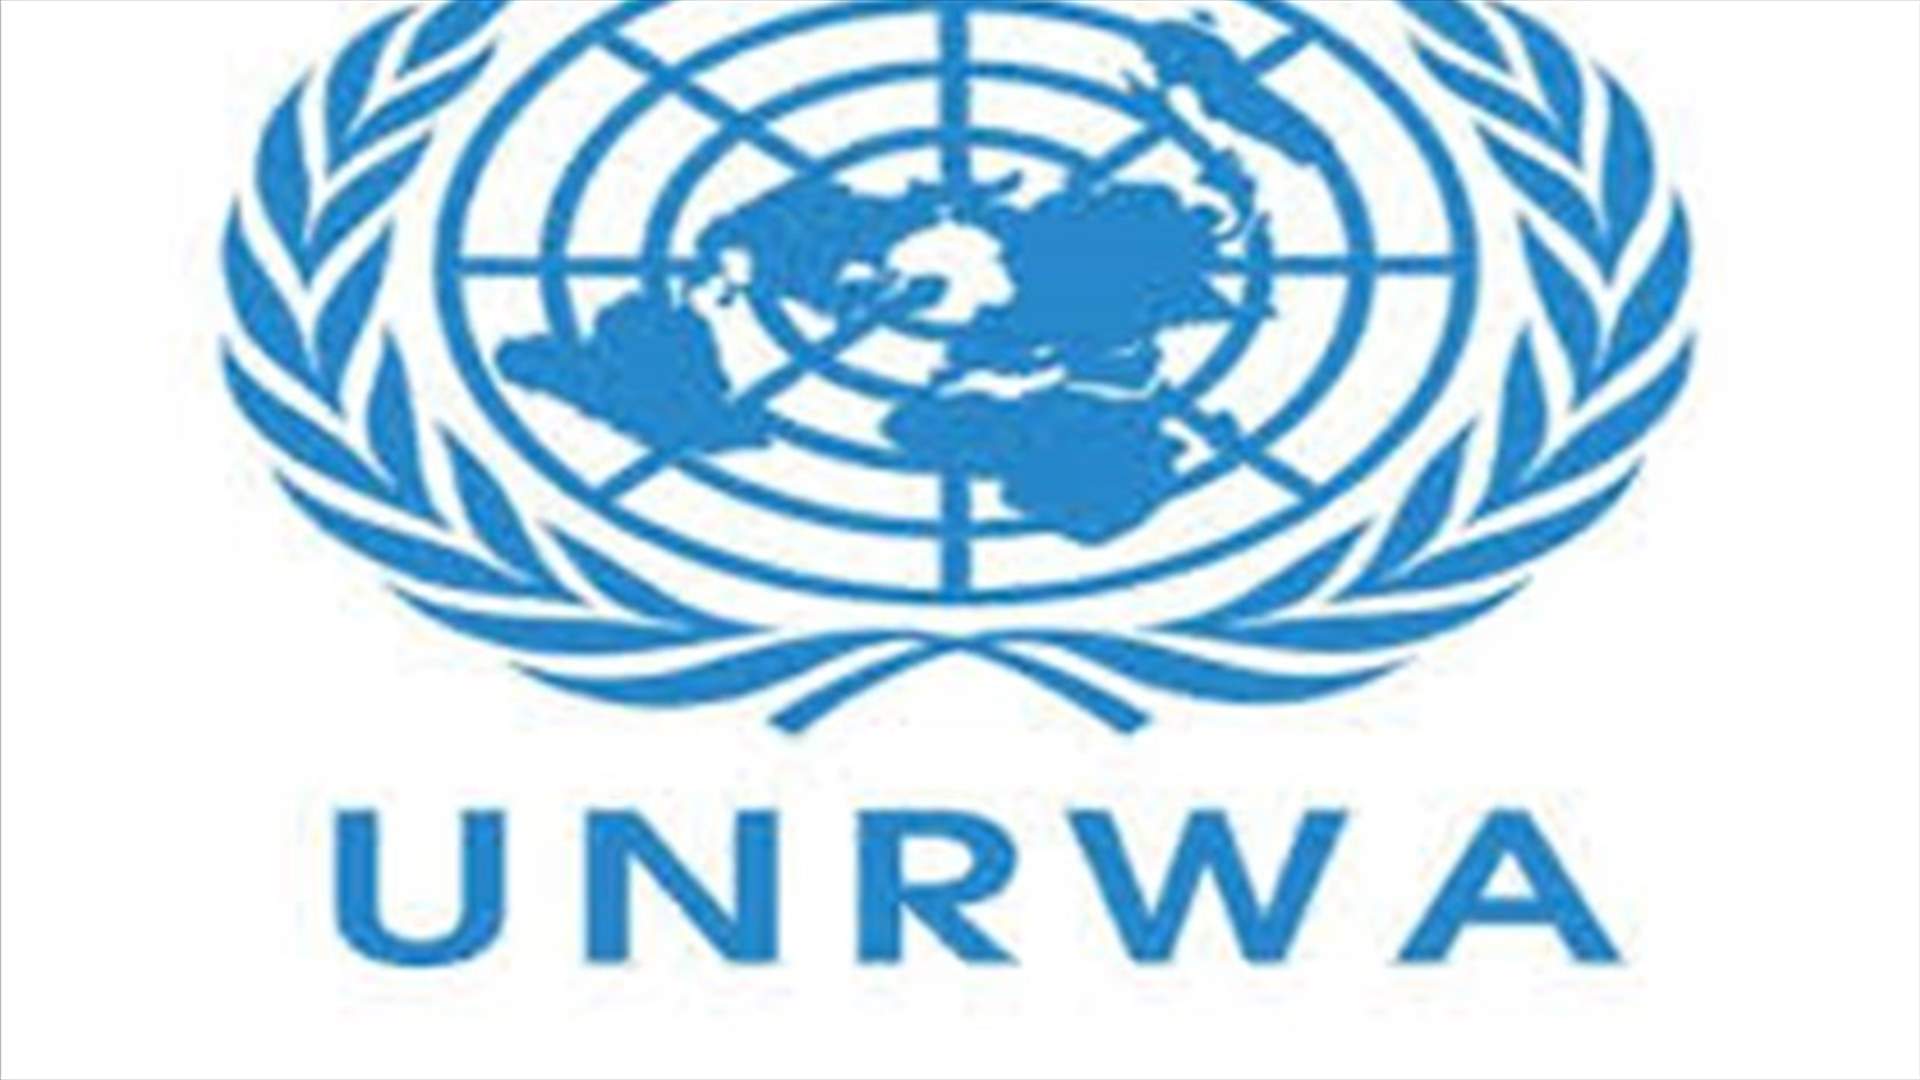 Palestinian popular committees close UNRWA offices in Sidon